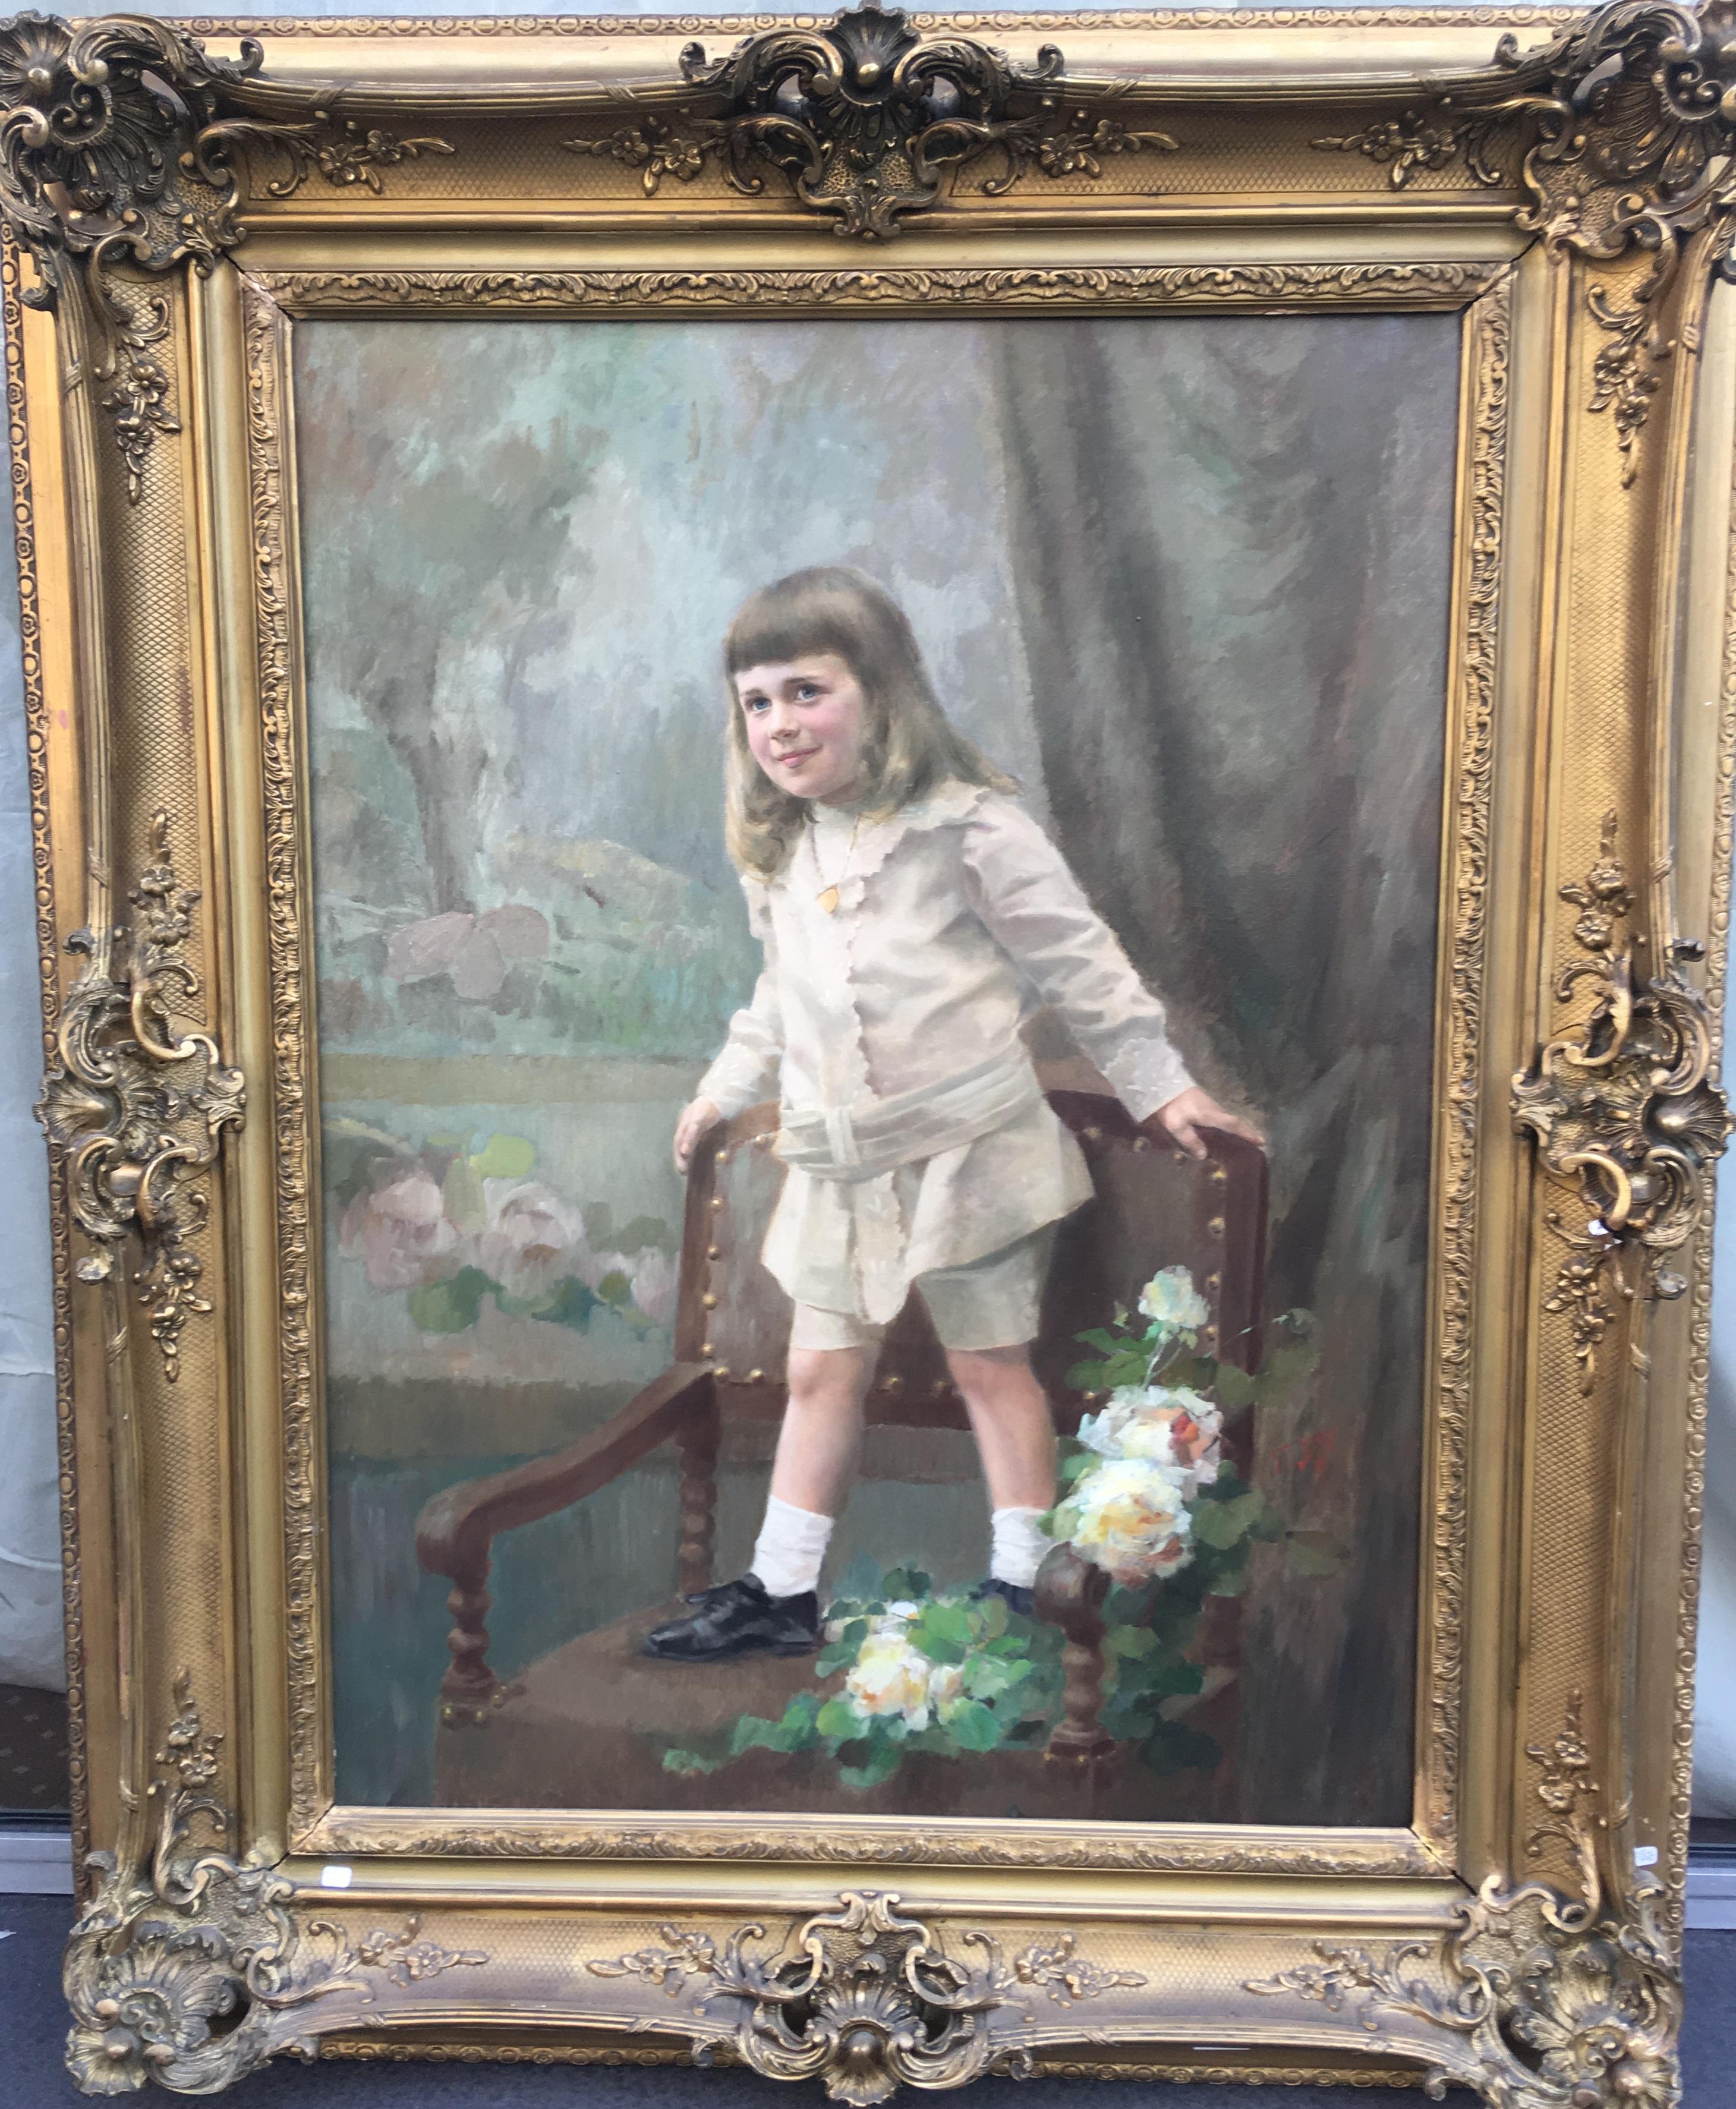 Lovely portrait of a young Boy standing on an armchair.

Oil on canvas signed Felix BRYK.
Swedish School, circa 1900-1910
Portraitist and ethnologist of the early twentieth century.
He is passionate from an early age for insects. Felix Bryk studied